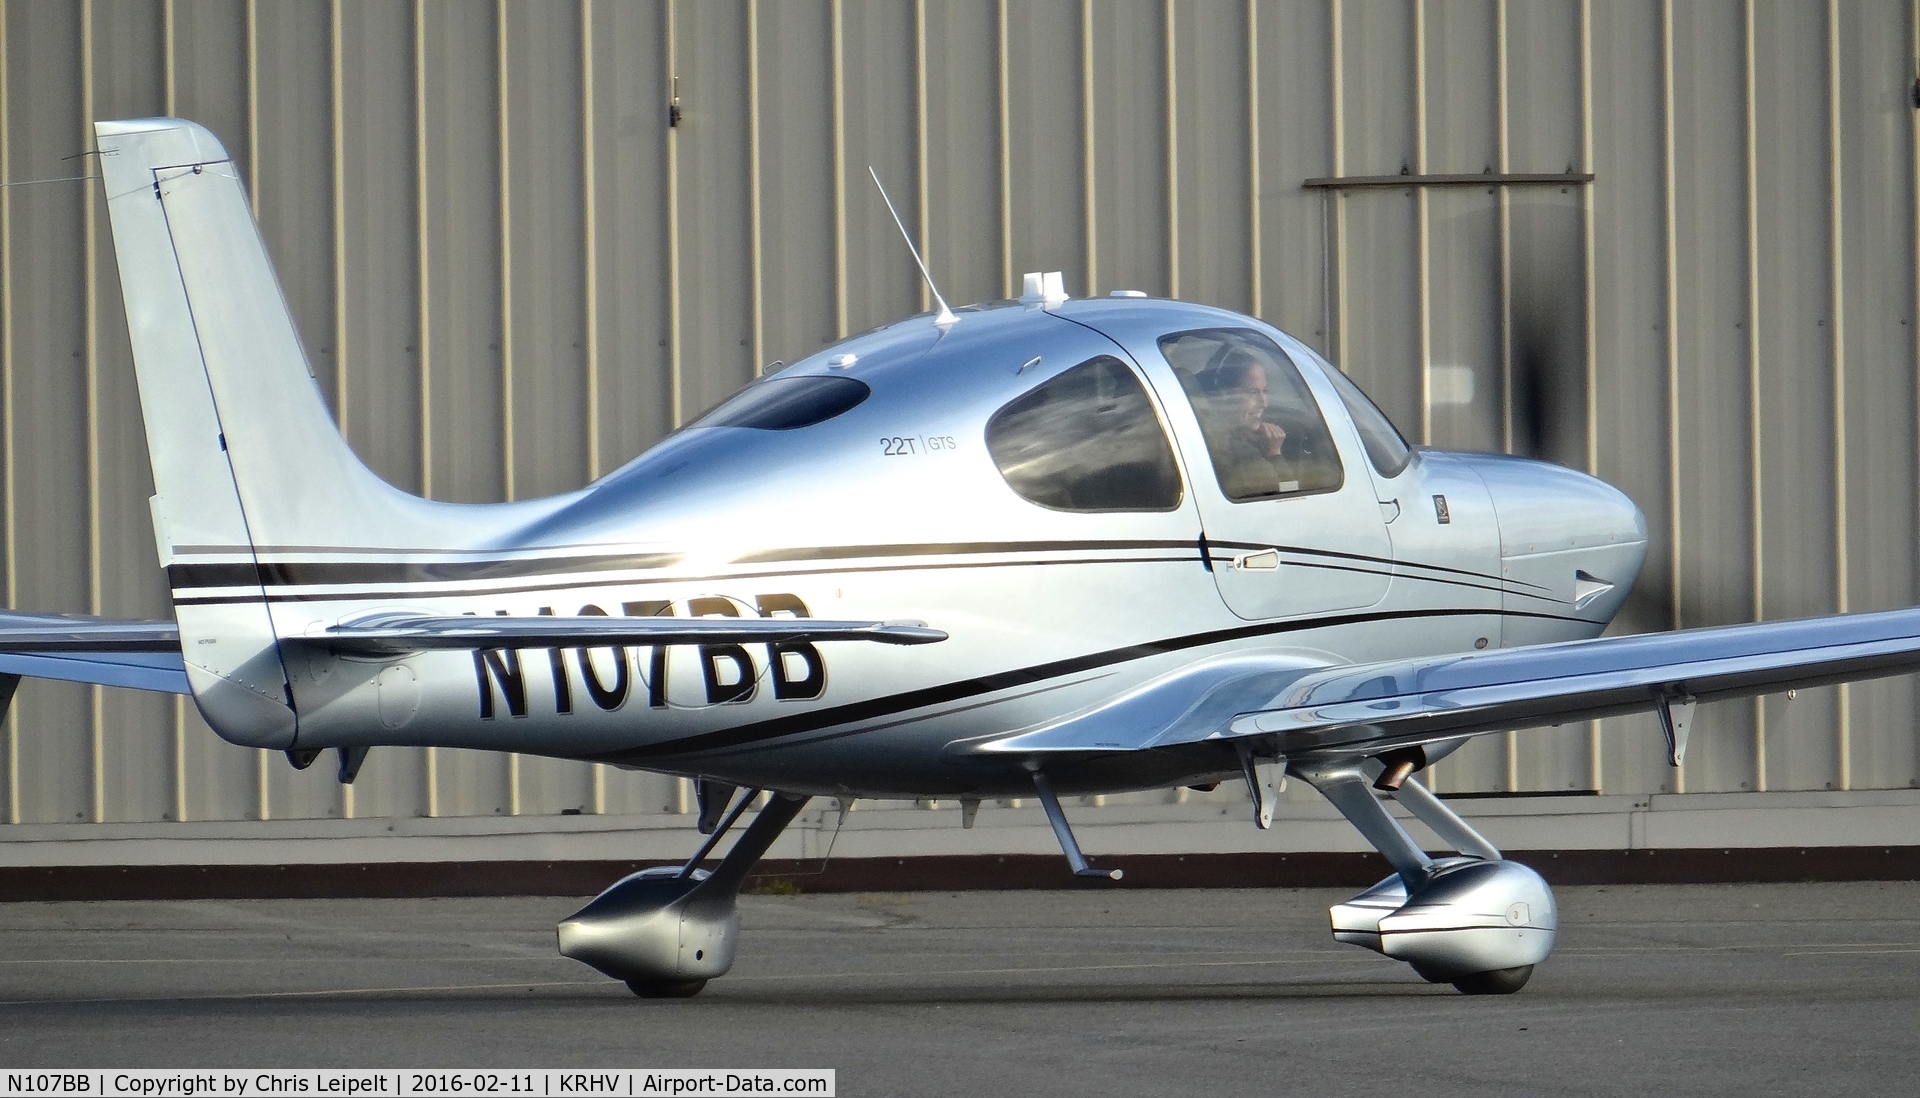 N107BB, 2016 Cirrus SR22 G3 GTS  X Turbo C/N 1235, Cirrus Design Corp. (Duluth, Minnesota) 2016 Cirrus SR22 G3 Turbo started up and taxing out for departure to Lake Tahoe Airport at Reid Hillview Airport, San Jose, CA.